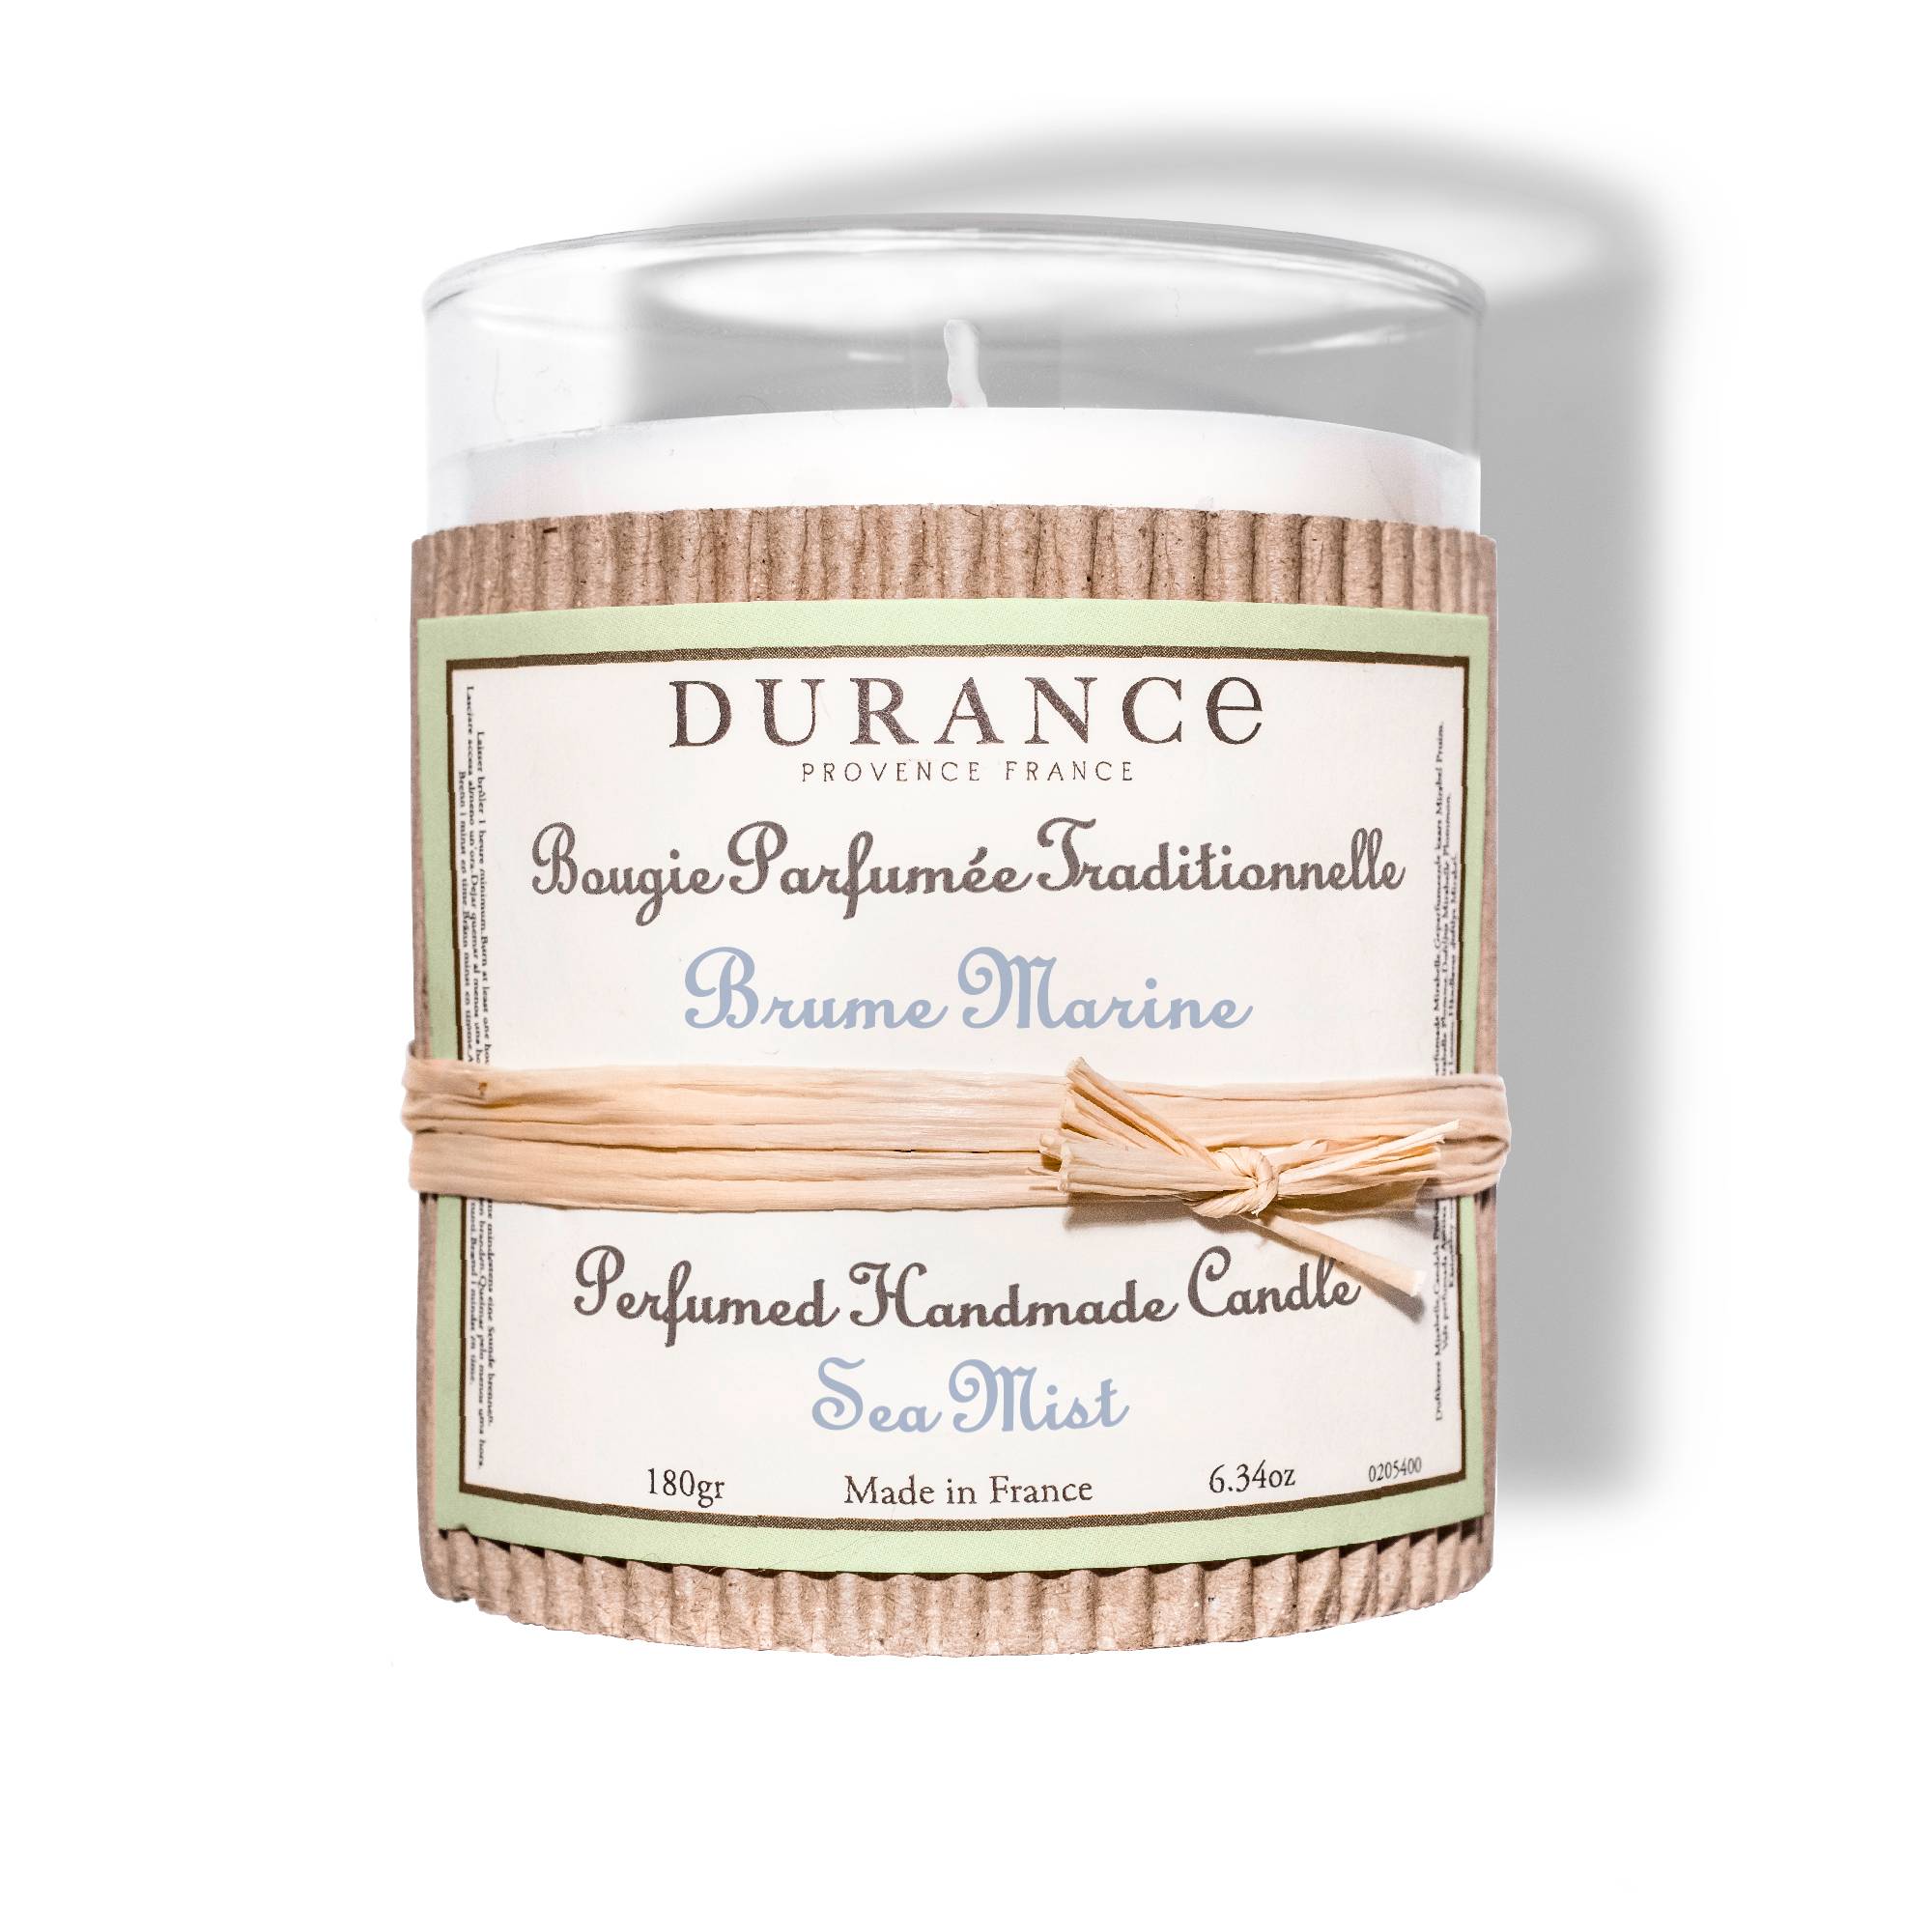 Bougie Traditionnelle Brume Marine 180g - Durance